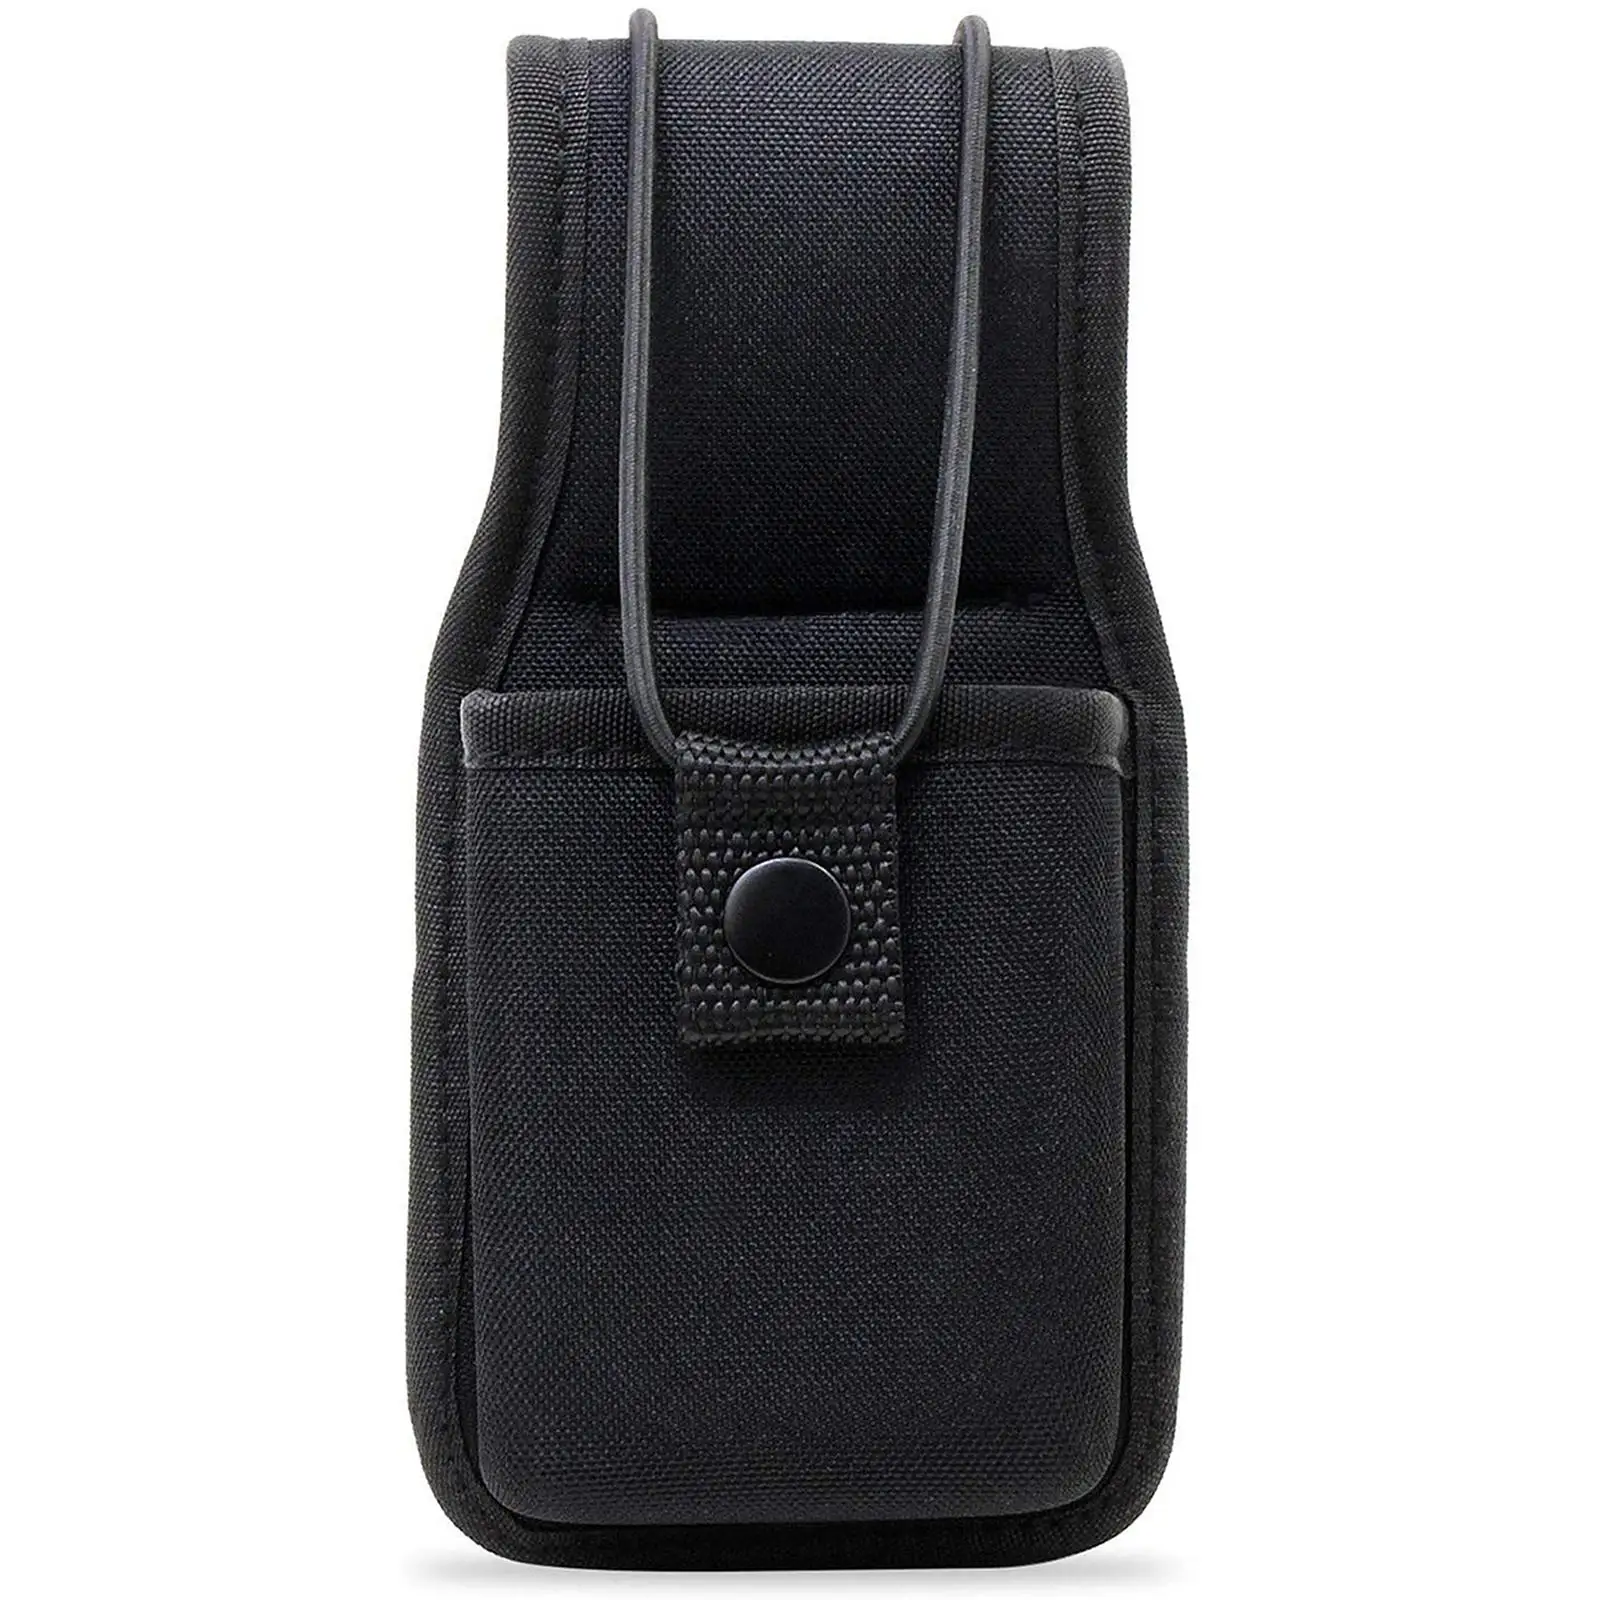 Nylon Radio Pouch Holster Portable Radio Case for Most Radio Mts2000 Camping